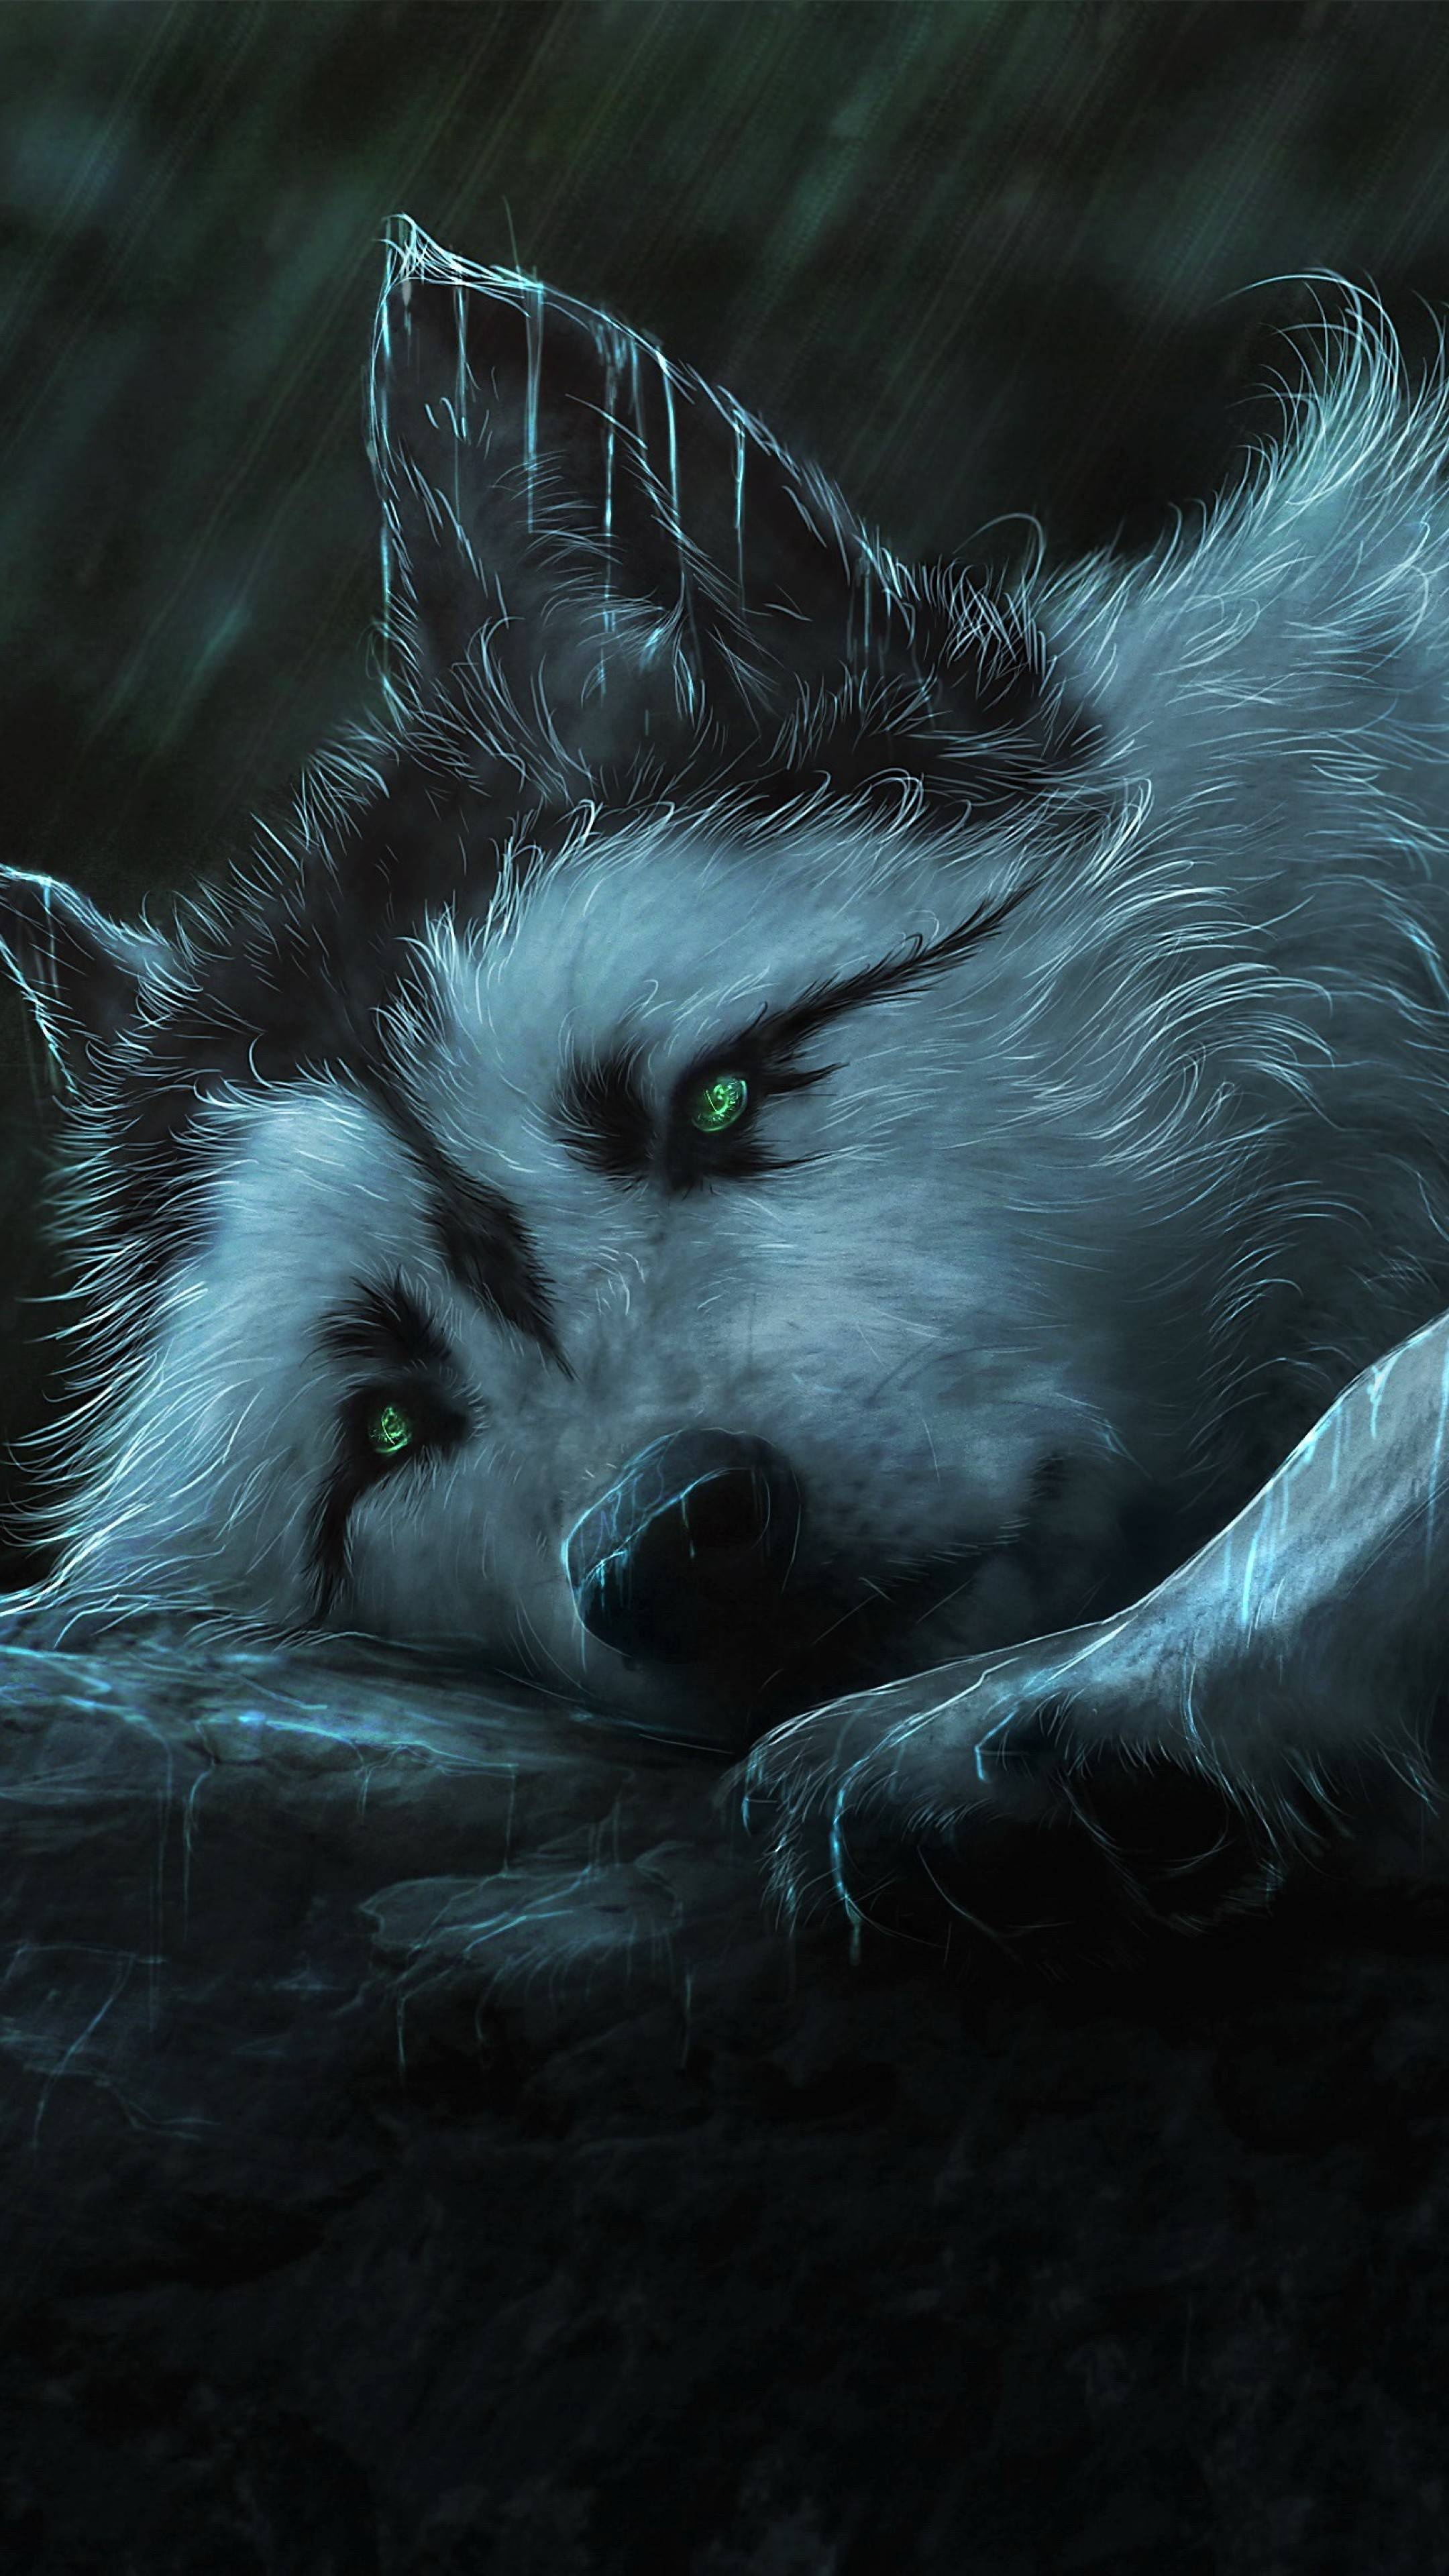 Wolves Painting Wallpapers - Top Free Wolves Painting Backgrounds 2160x3840